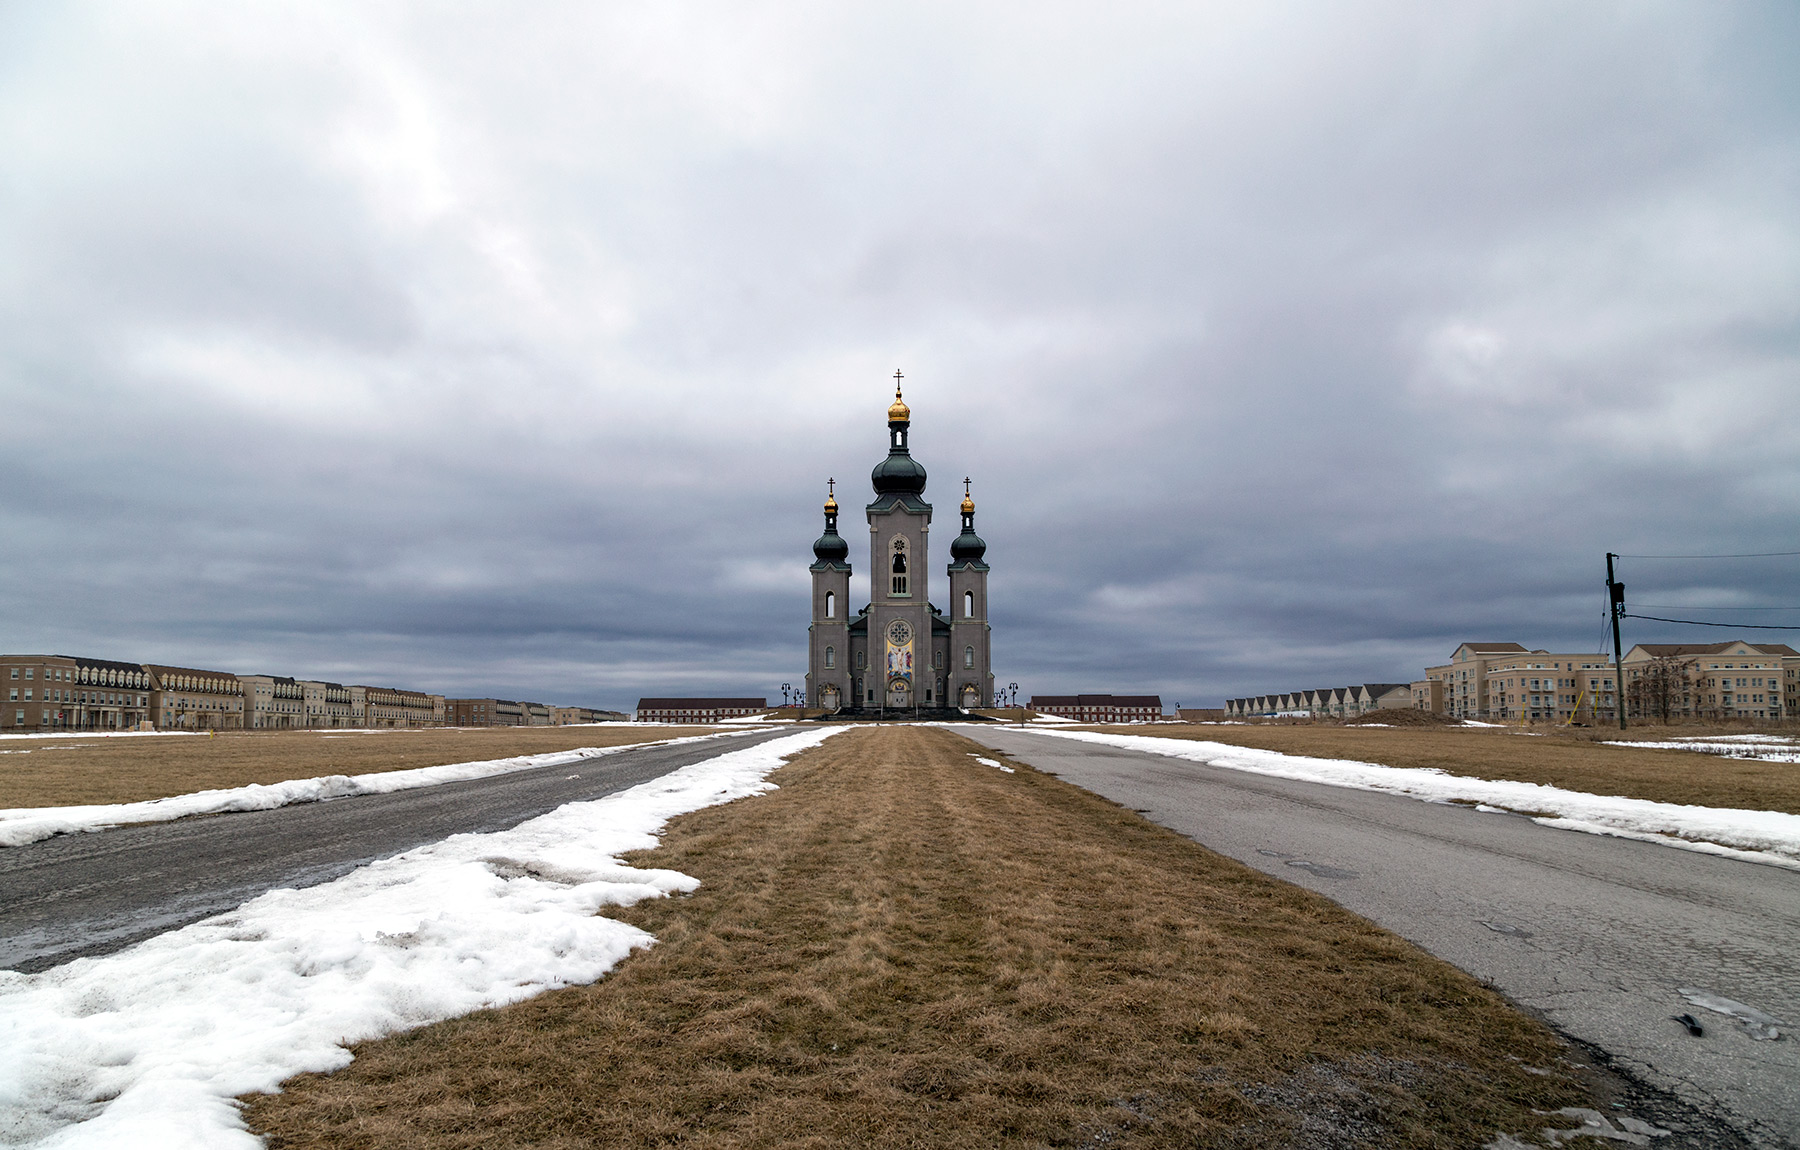 20150315. The Cathedral of the Transfiguration sits empty in the